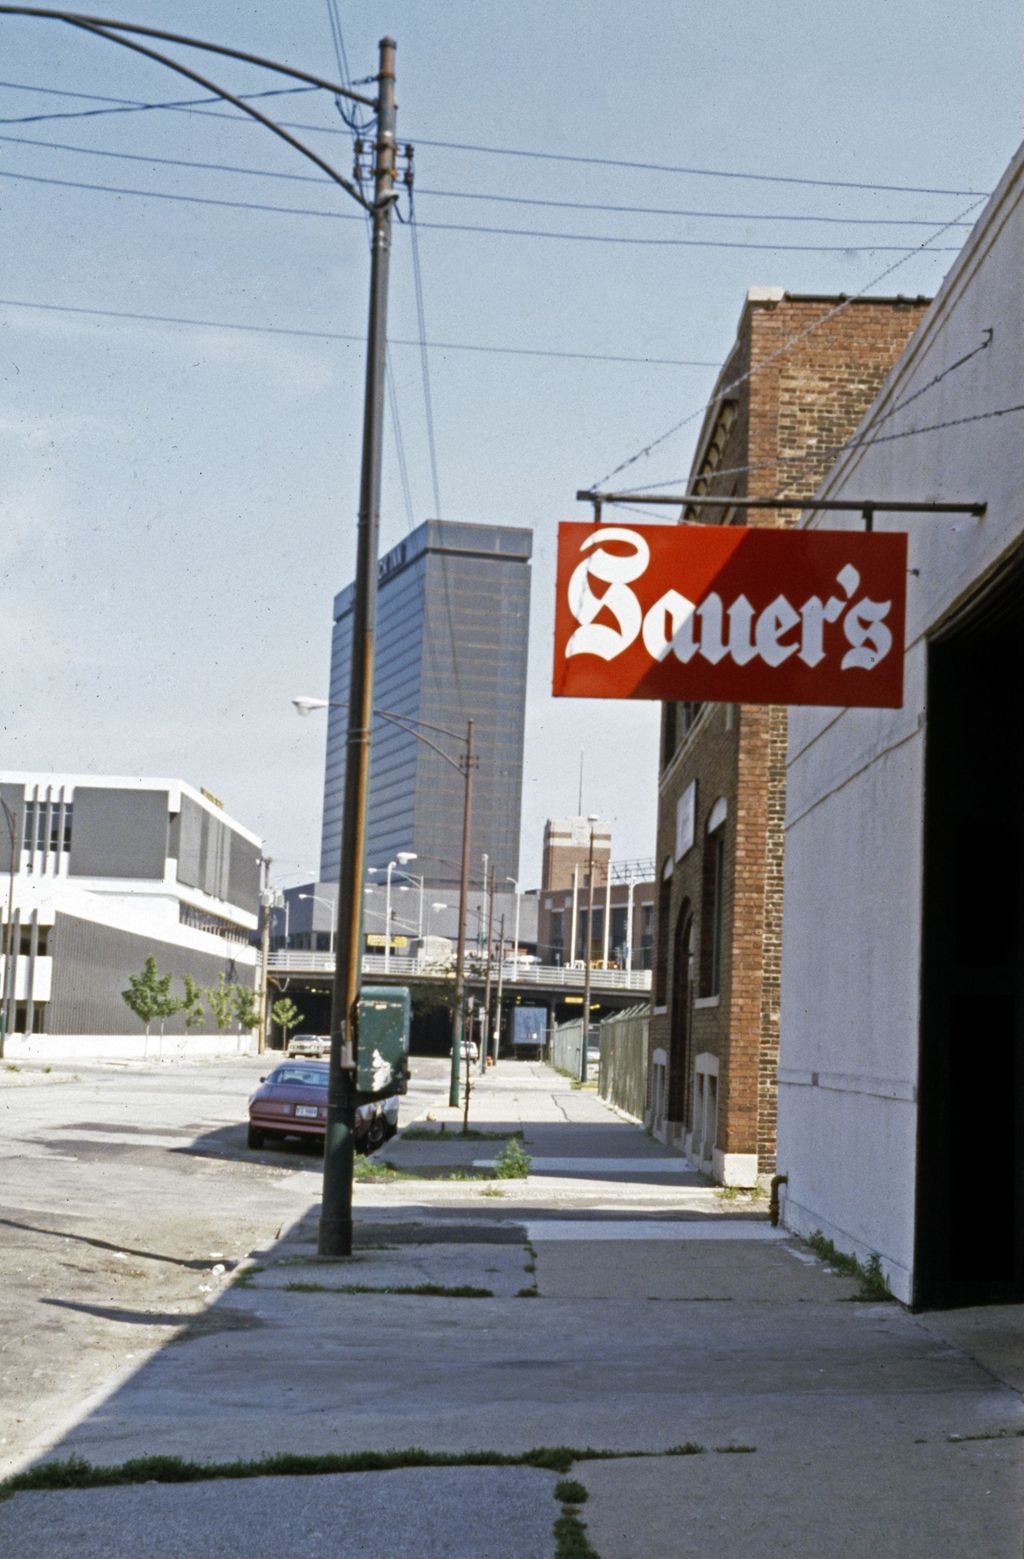 Miniature of East 23rd Street with Sauer's Restaurant sign